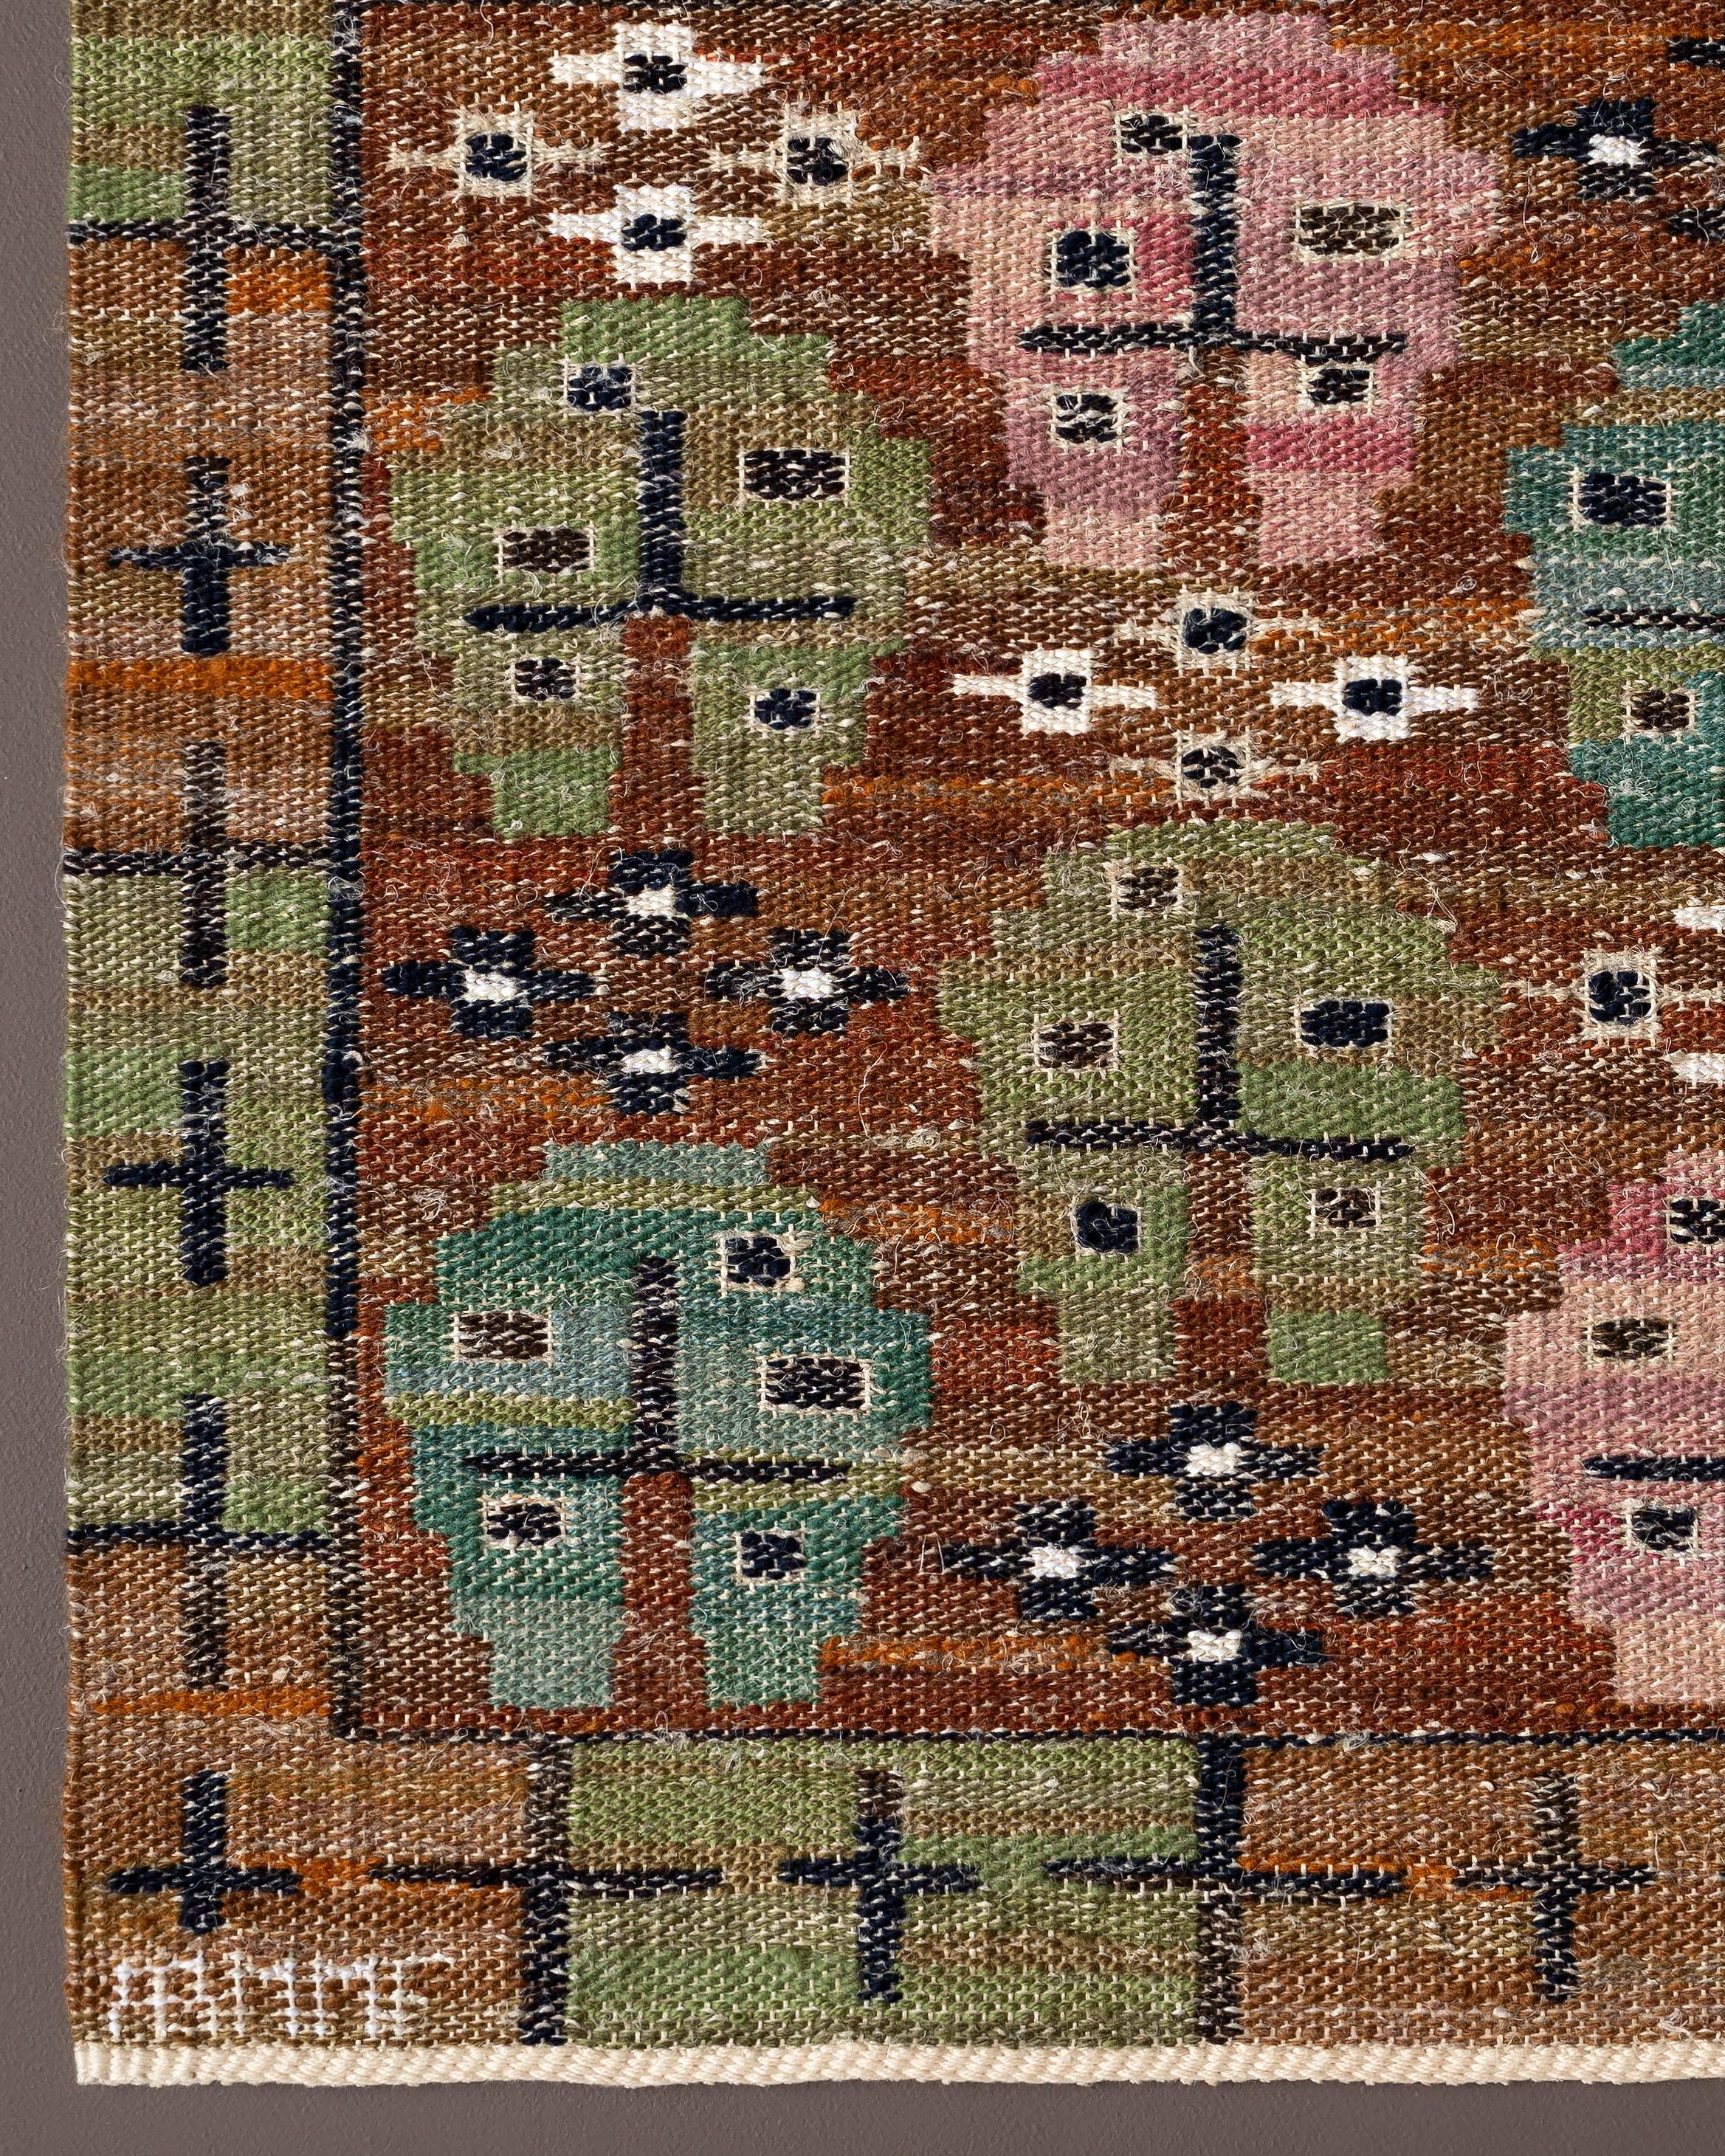 Handwoven tapestry with floral motif, designed by Märta Måås-Fjetterström in 1932. 

Woven in wool and hand spun linen on a linen warp by artisan weaver Petra Elström in 2012 at the Märta Måås-Fjetterström studio in Båstad, Sweden. 

The tapestry